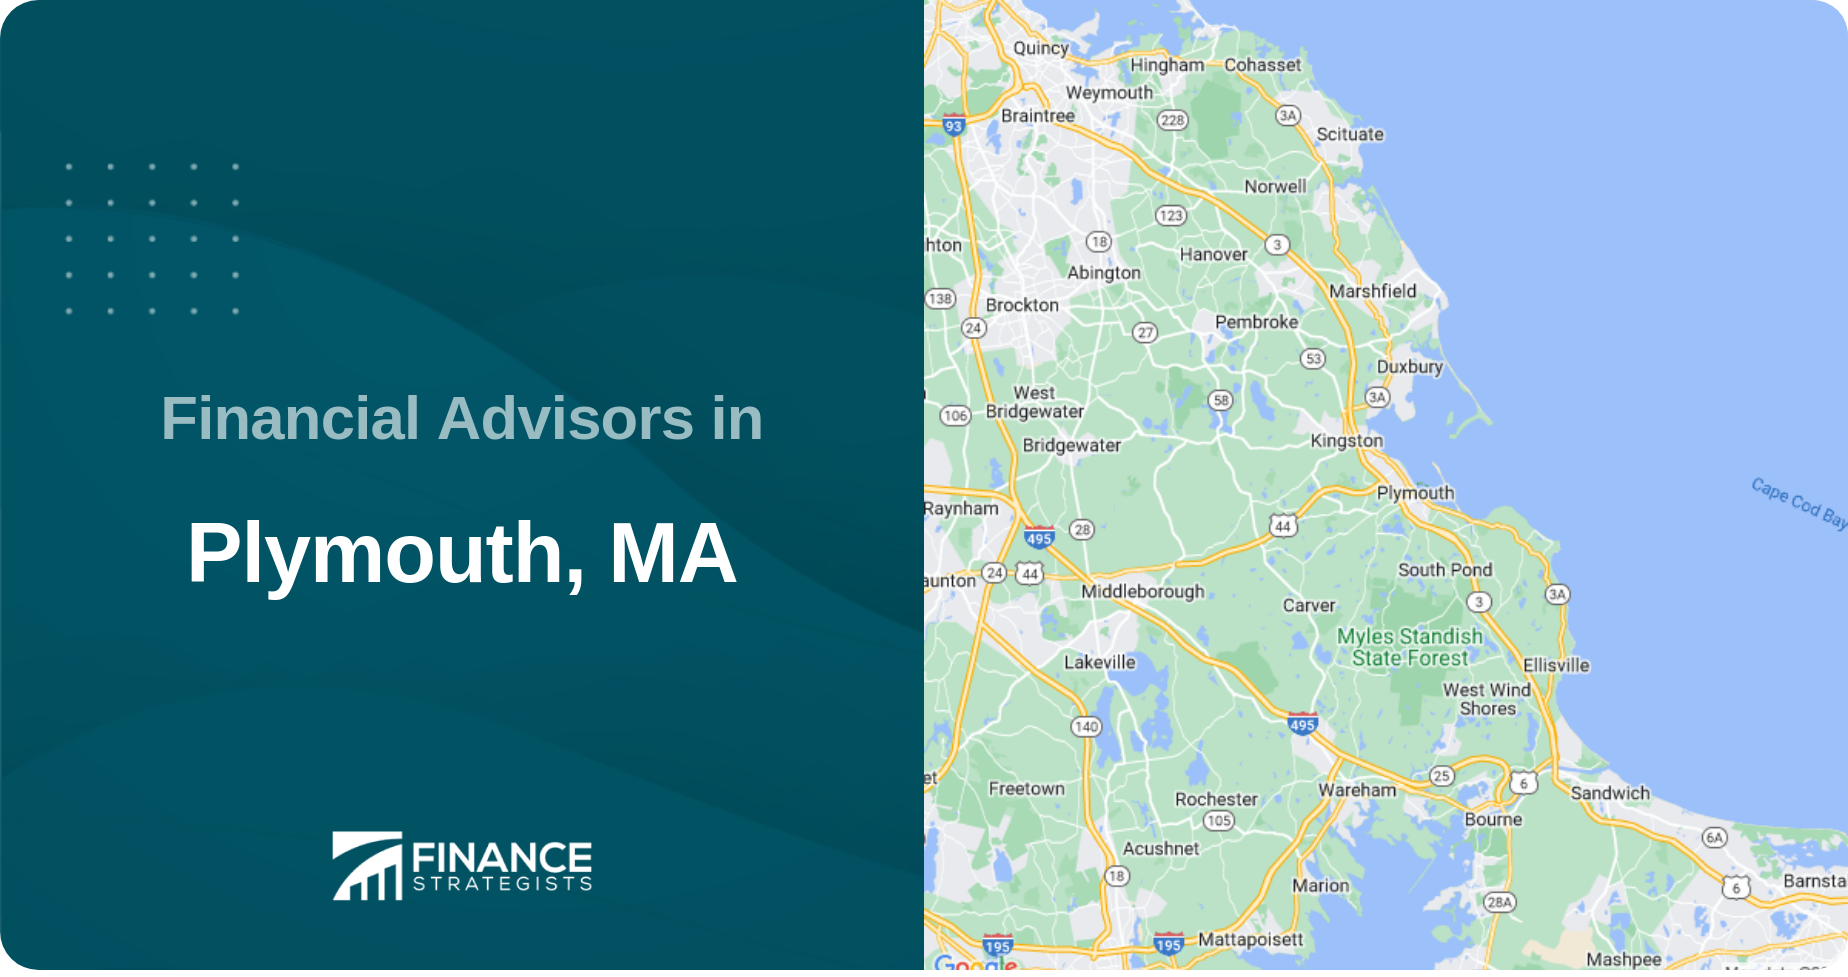 Financial Advisors in Plymouth, MA